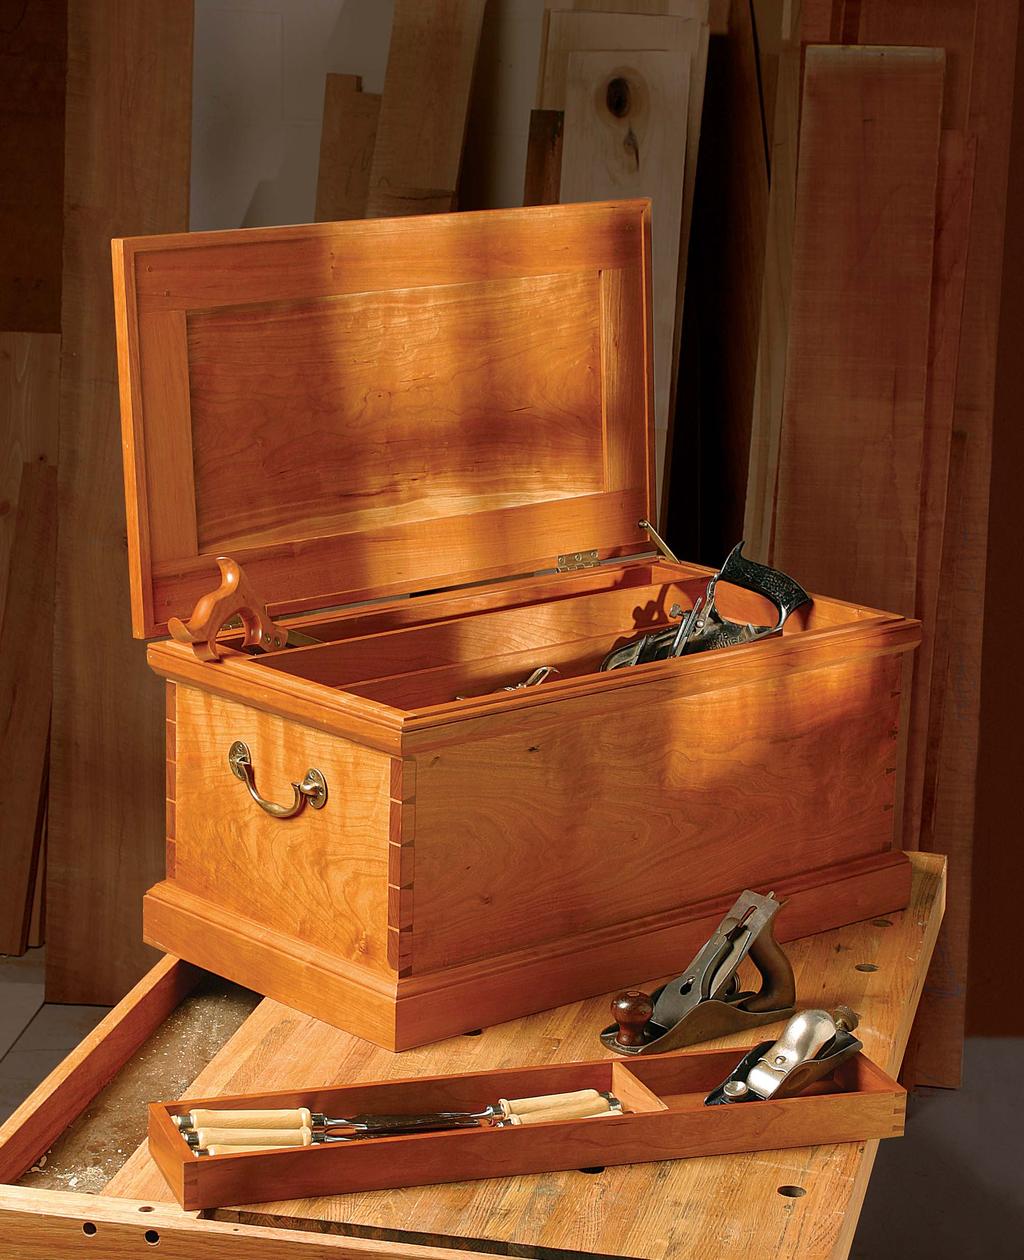 Heirloom Tool Chest This classic chest offers a